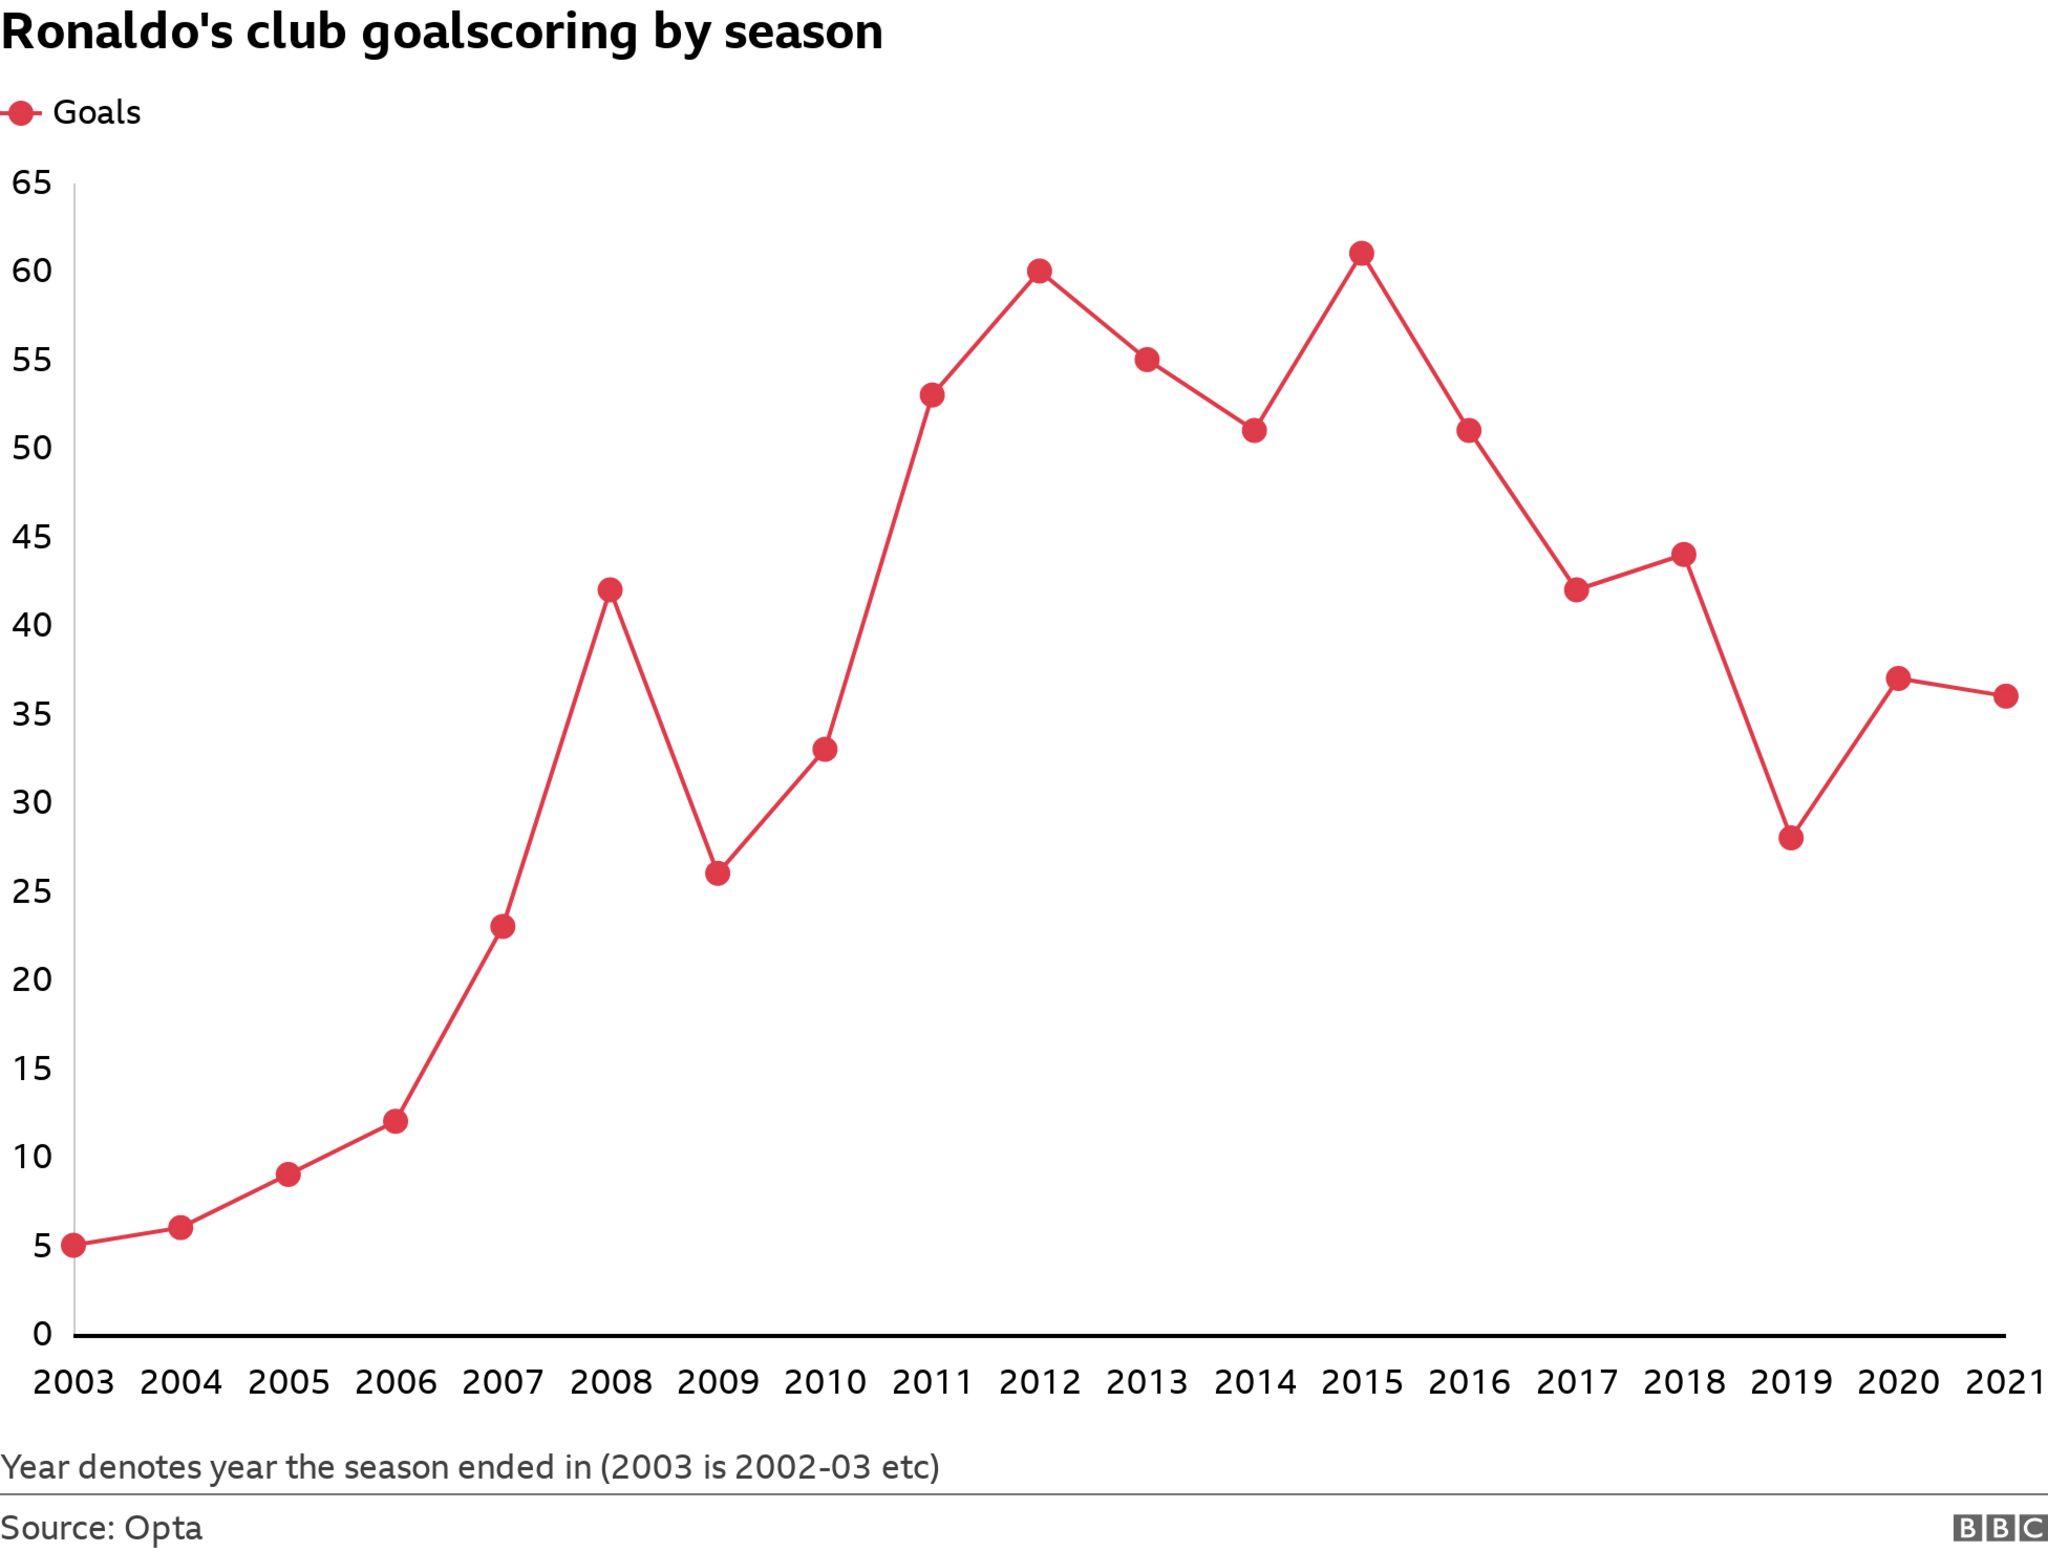 How Cristiano Ronaldo's goalscoring has changed by season (five in 2002-03, 61 in 2014-15 and 36 last season)